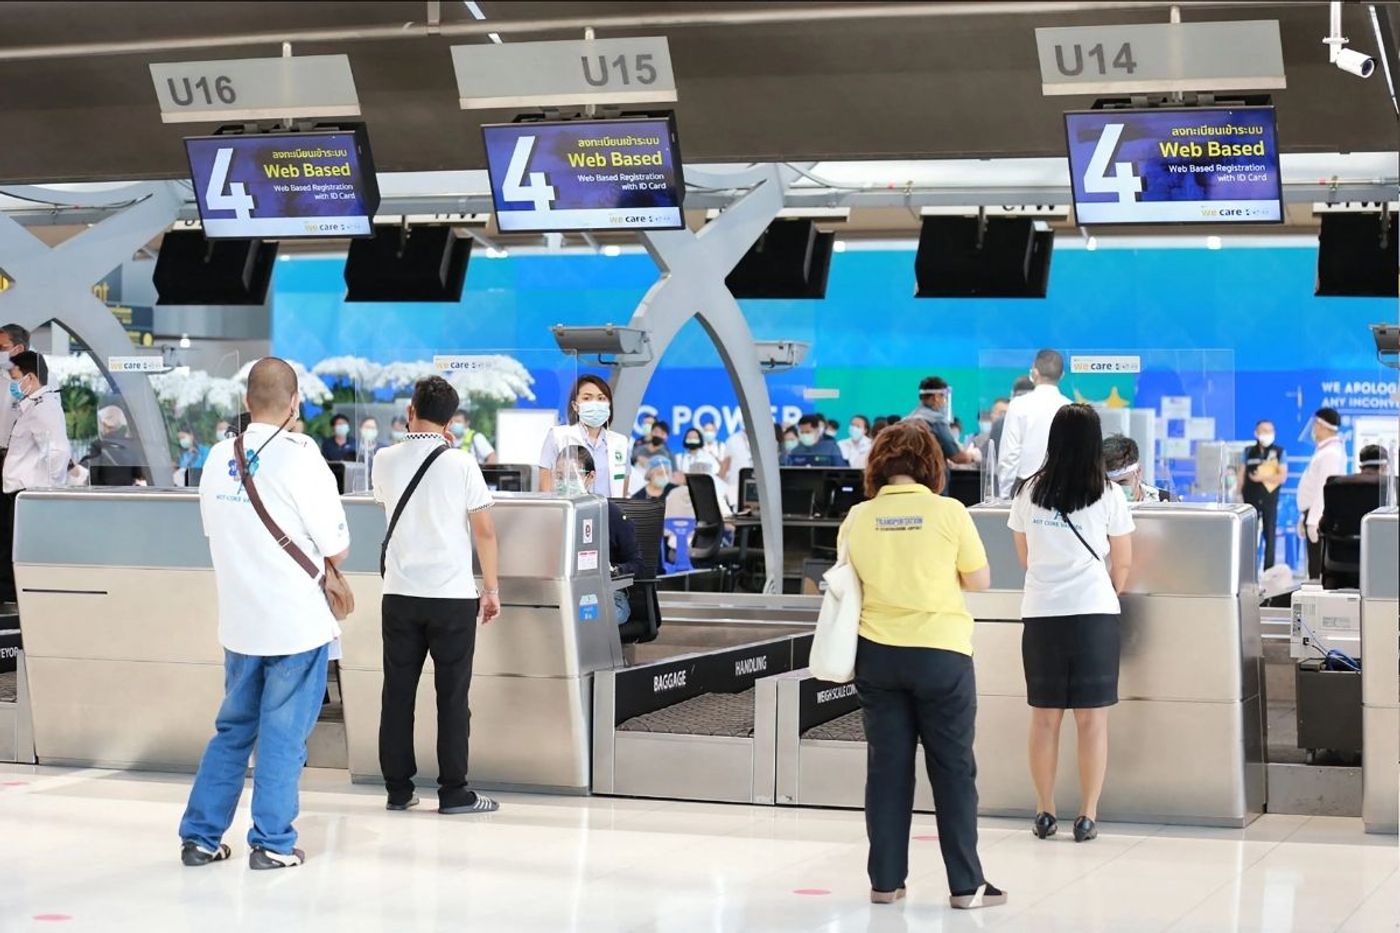 Tips to remember when you are in Suvarnabhumi Airport, Bangkok